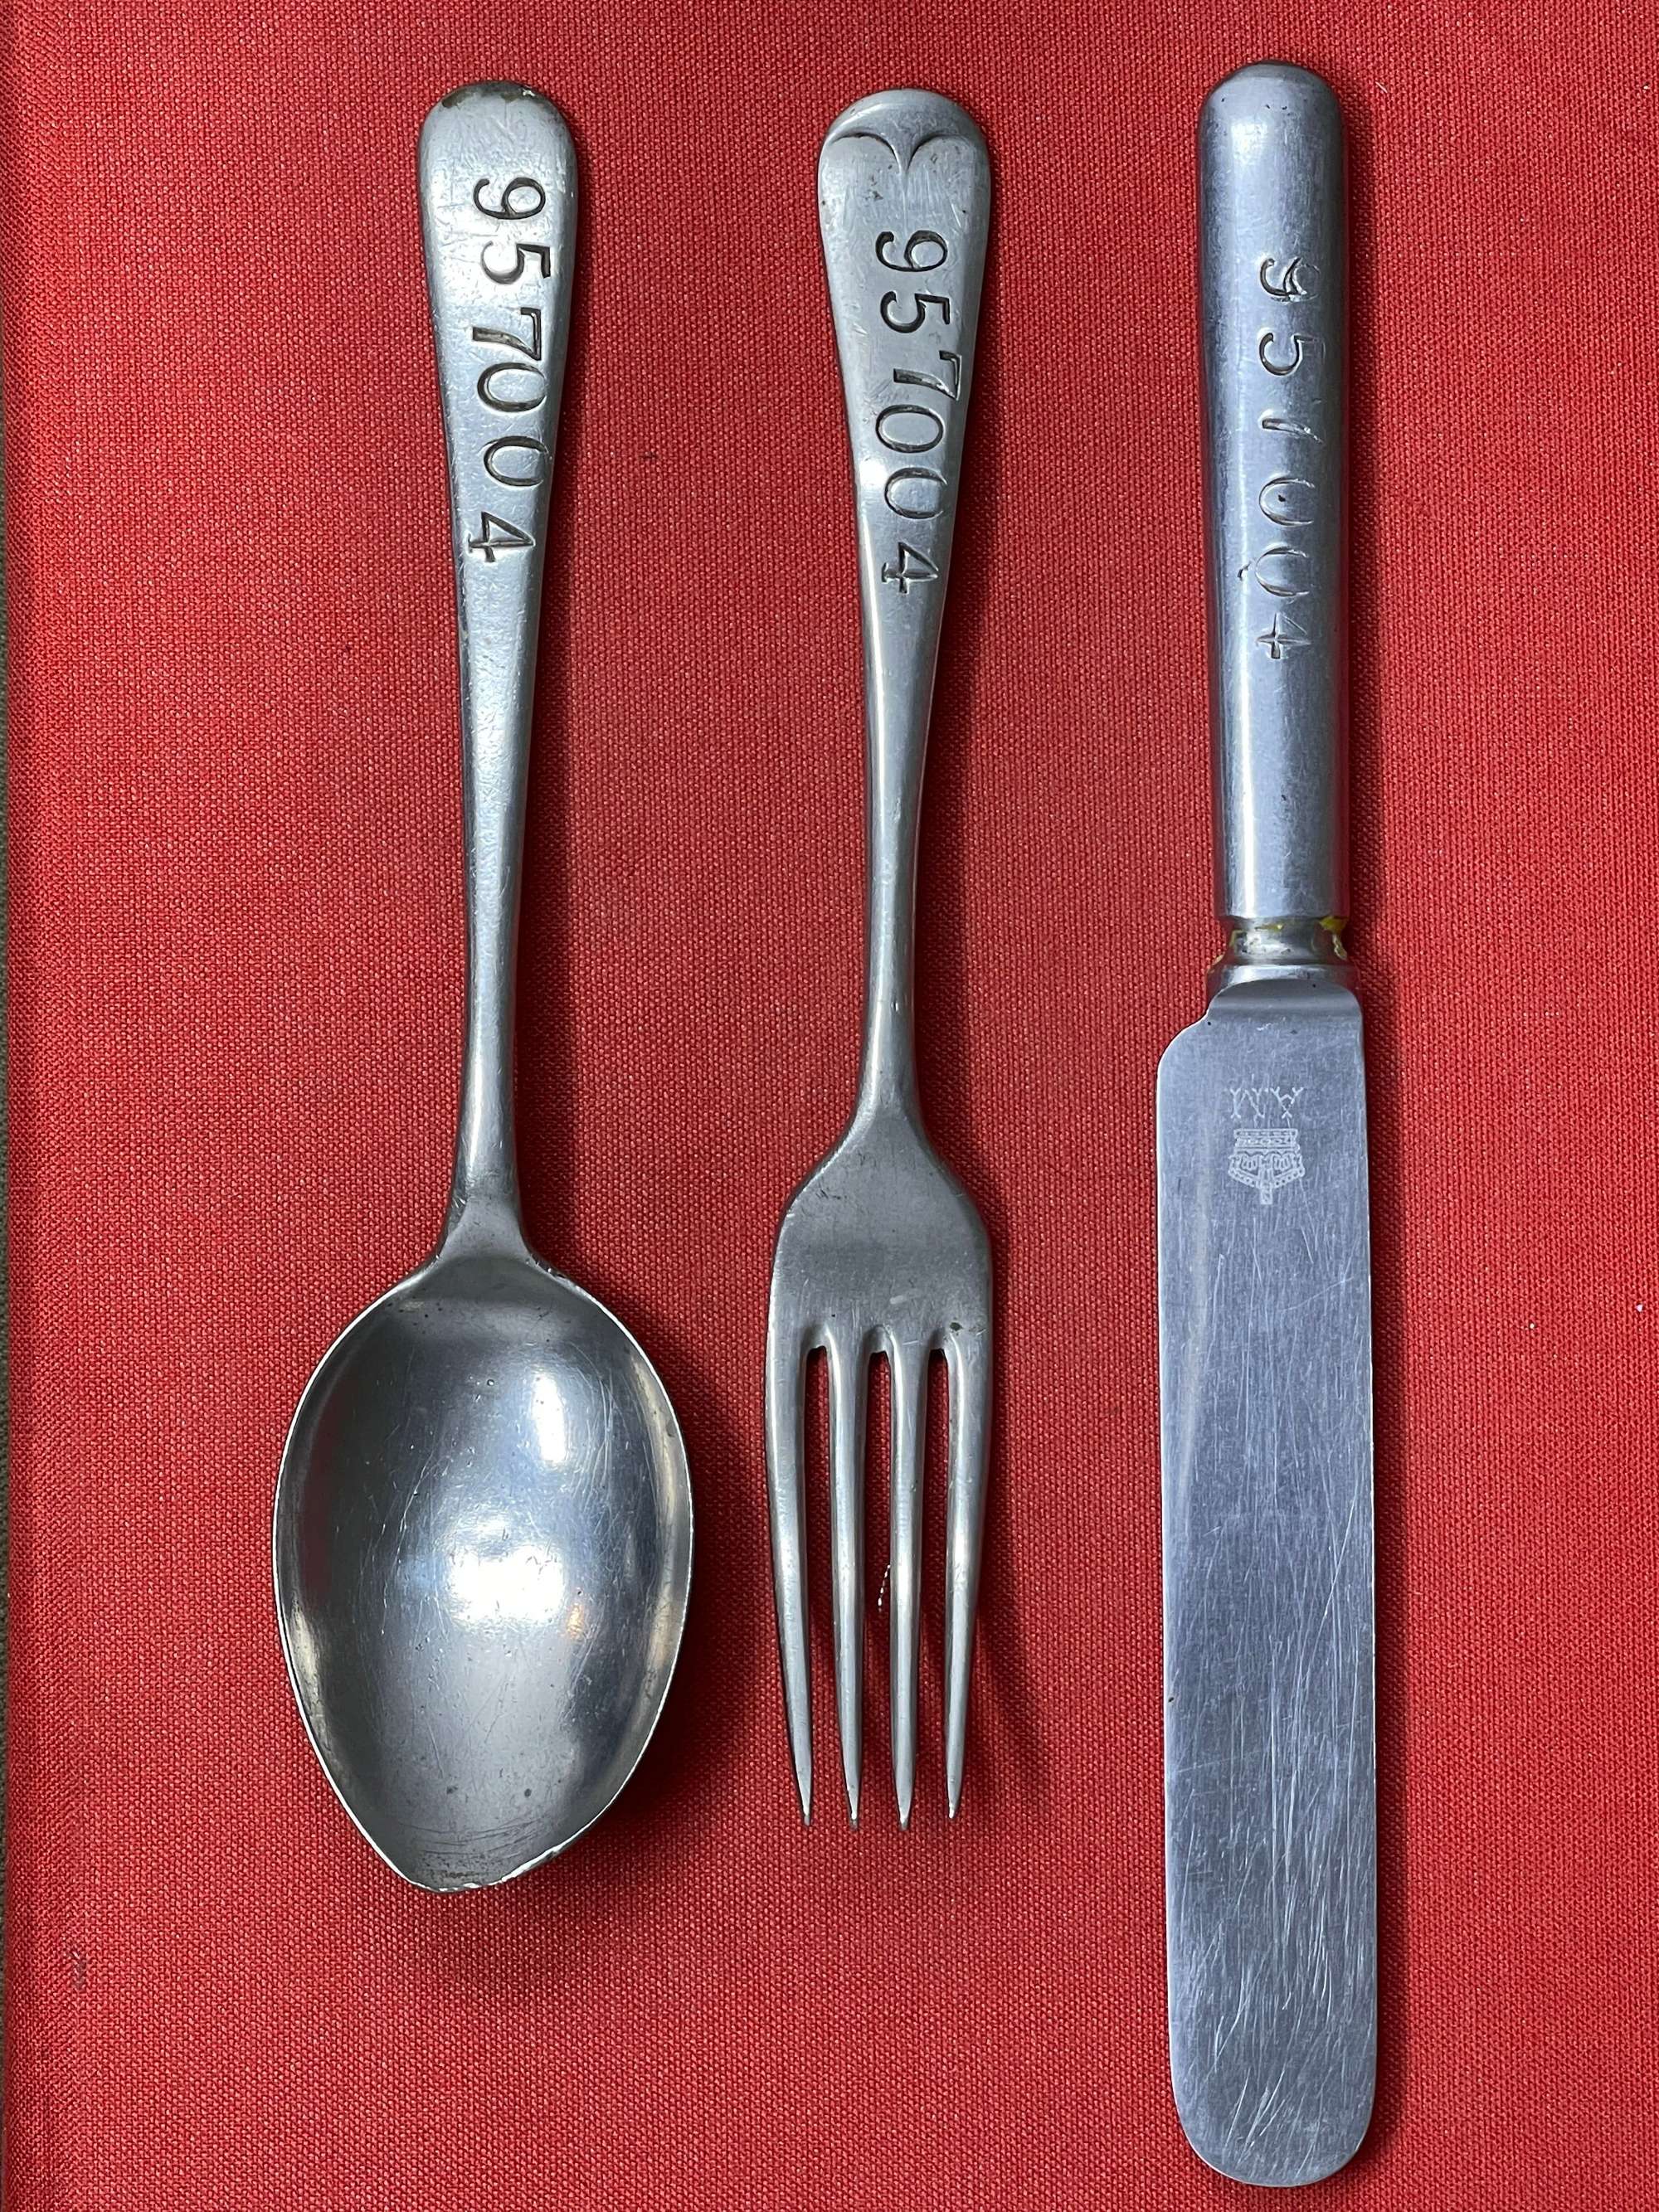 WW2  Knife, fork, and spoon set AM Marked